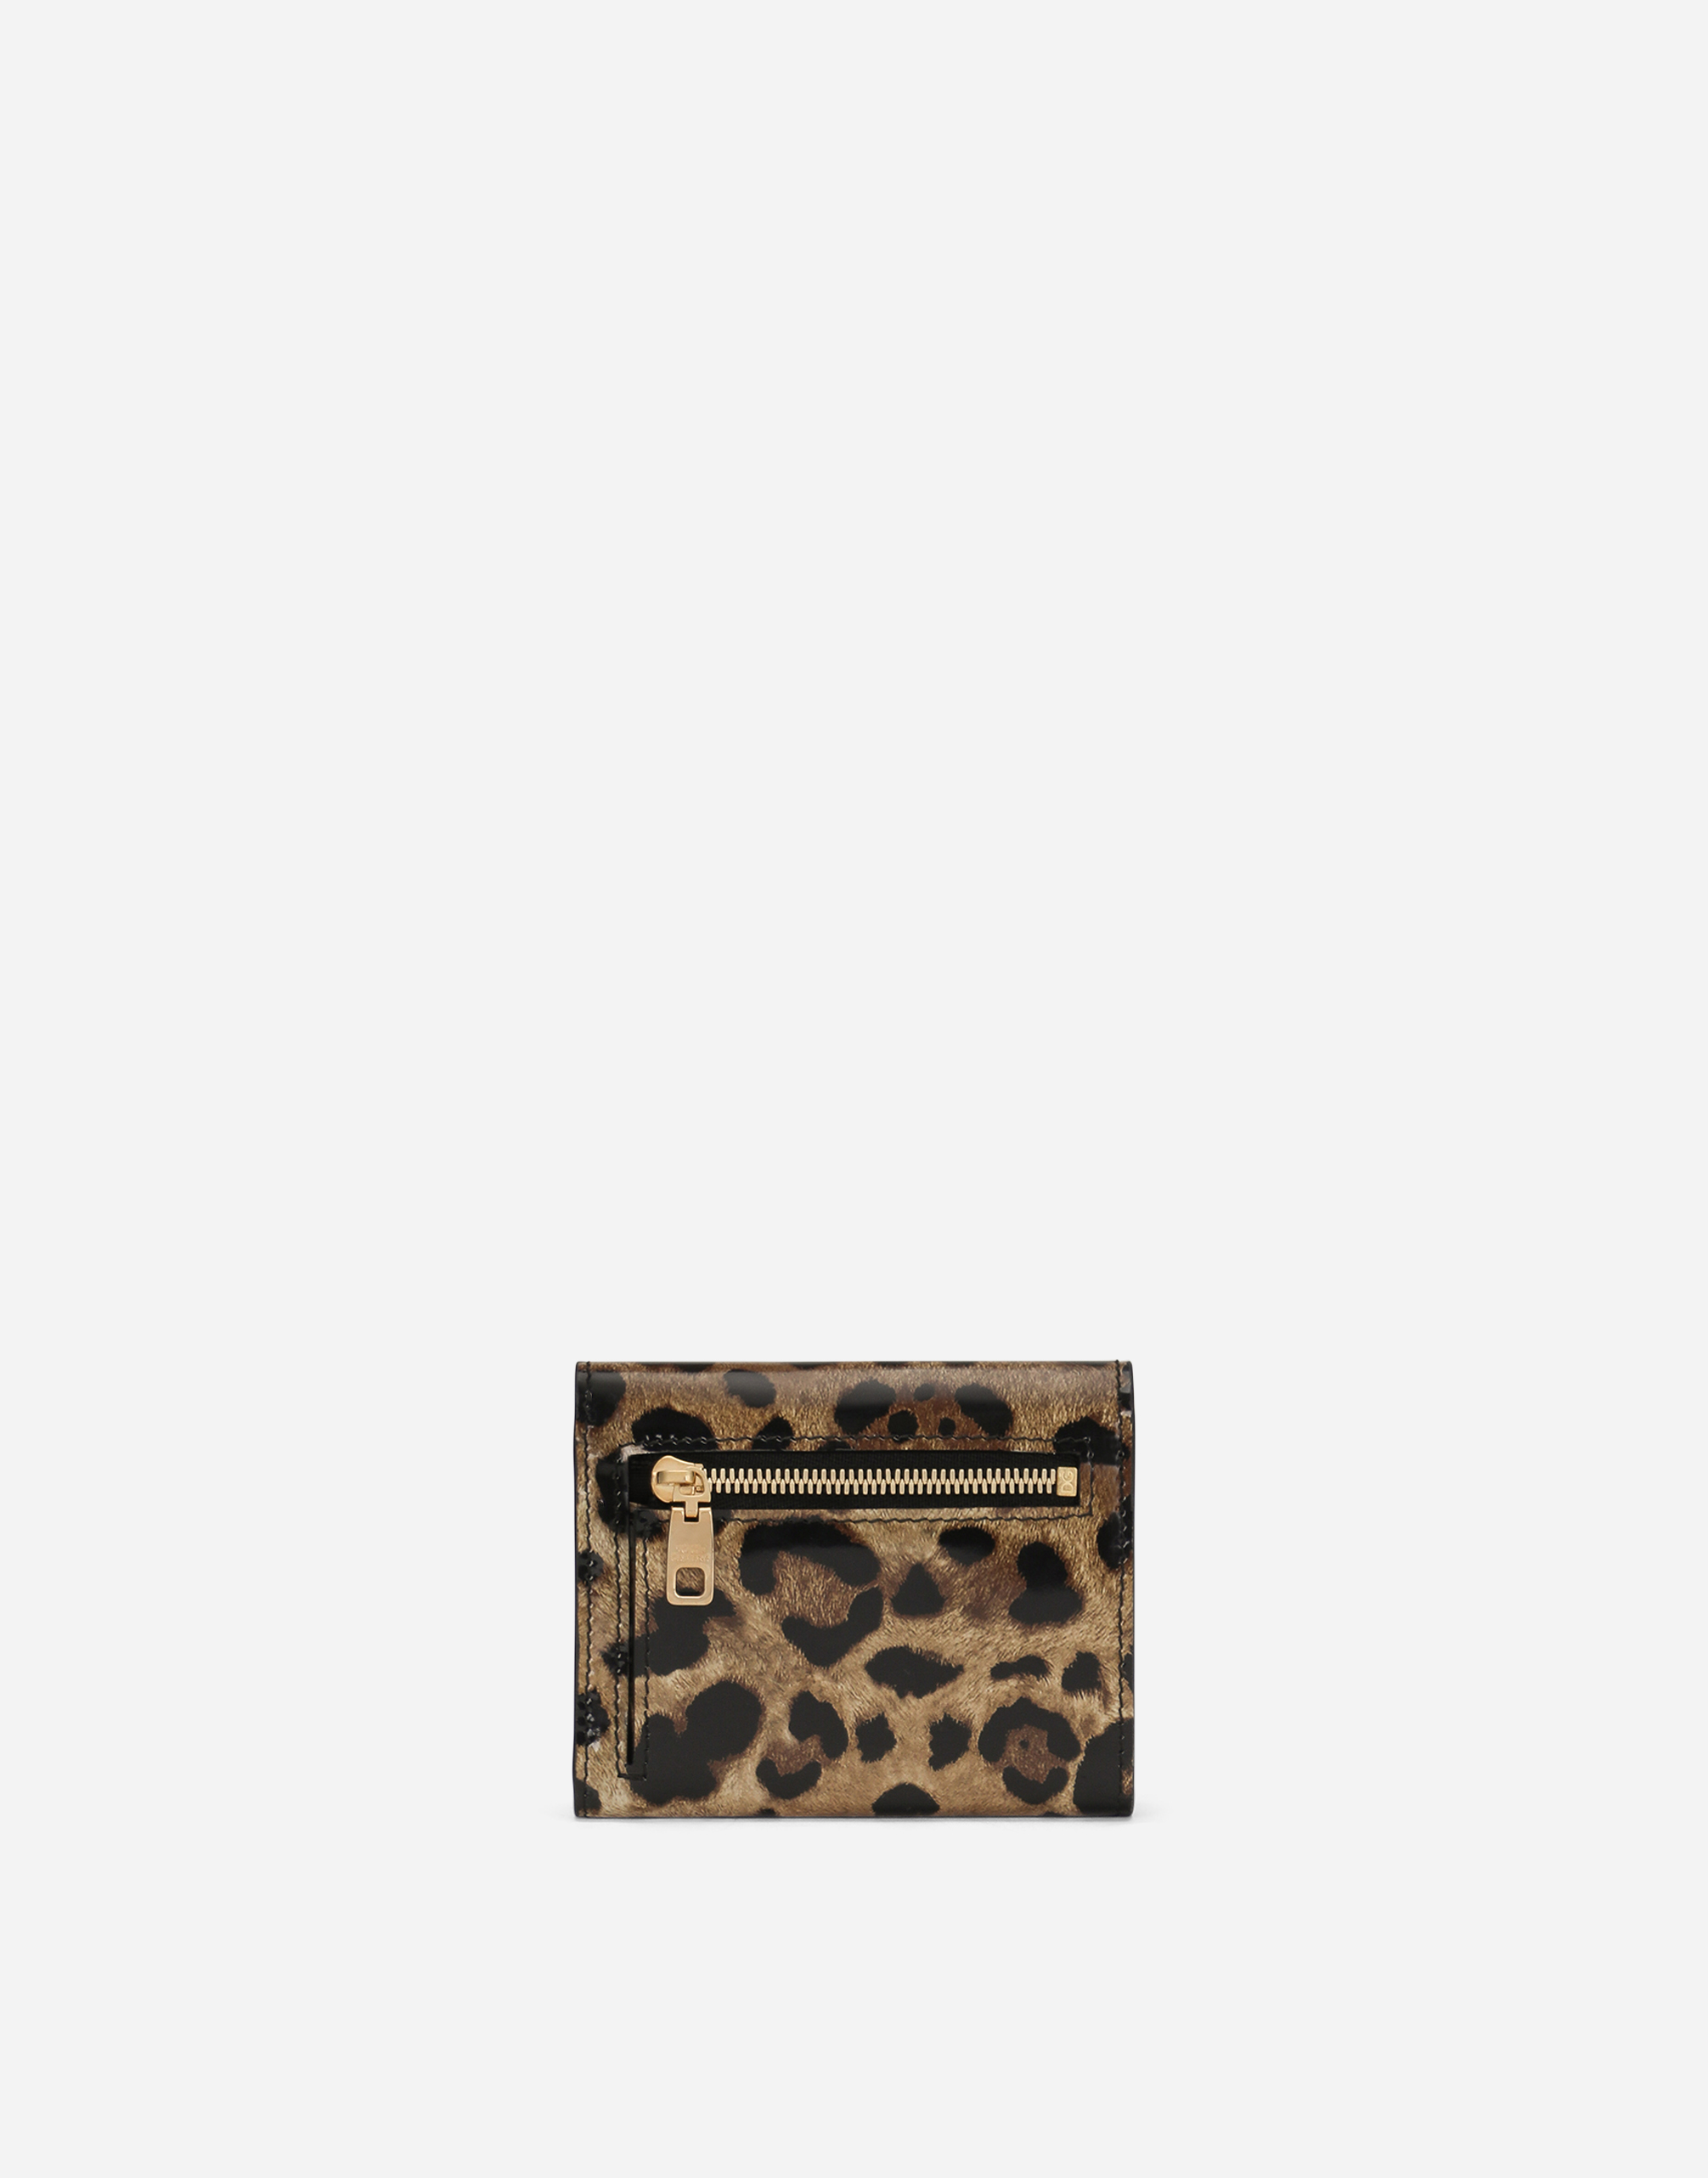 Polished calfskin wallet with leopard print in Animal Print for